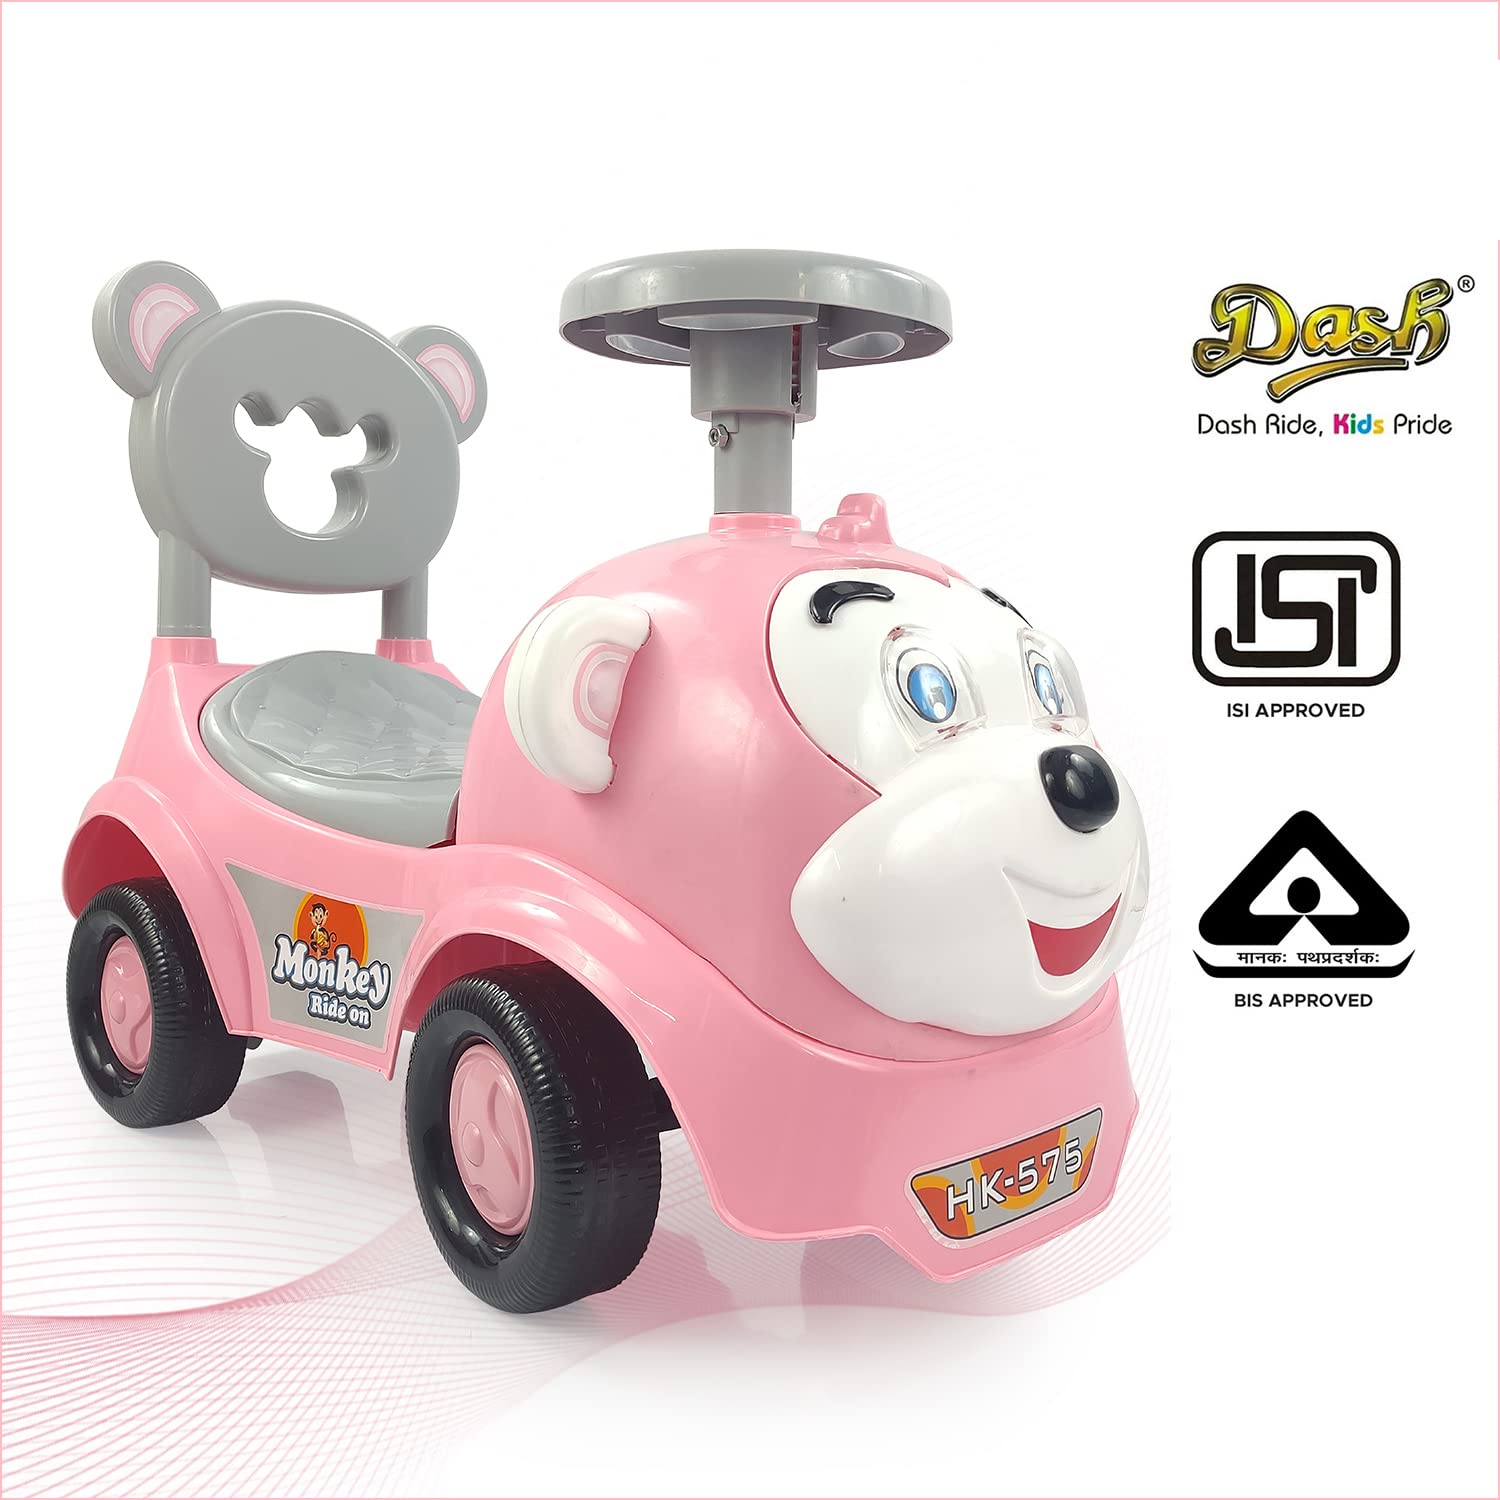 Monkey Ride On for Kids, Baby Car, Ride On for Kids 2 Years+, Push Car for Baby with Backrest and Under Seat Storage Utility Box for Toys